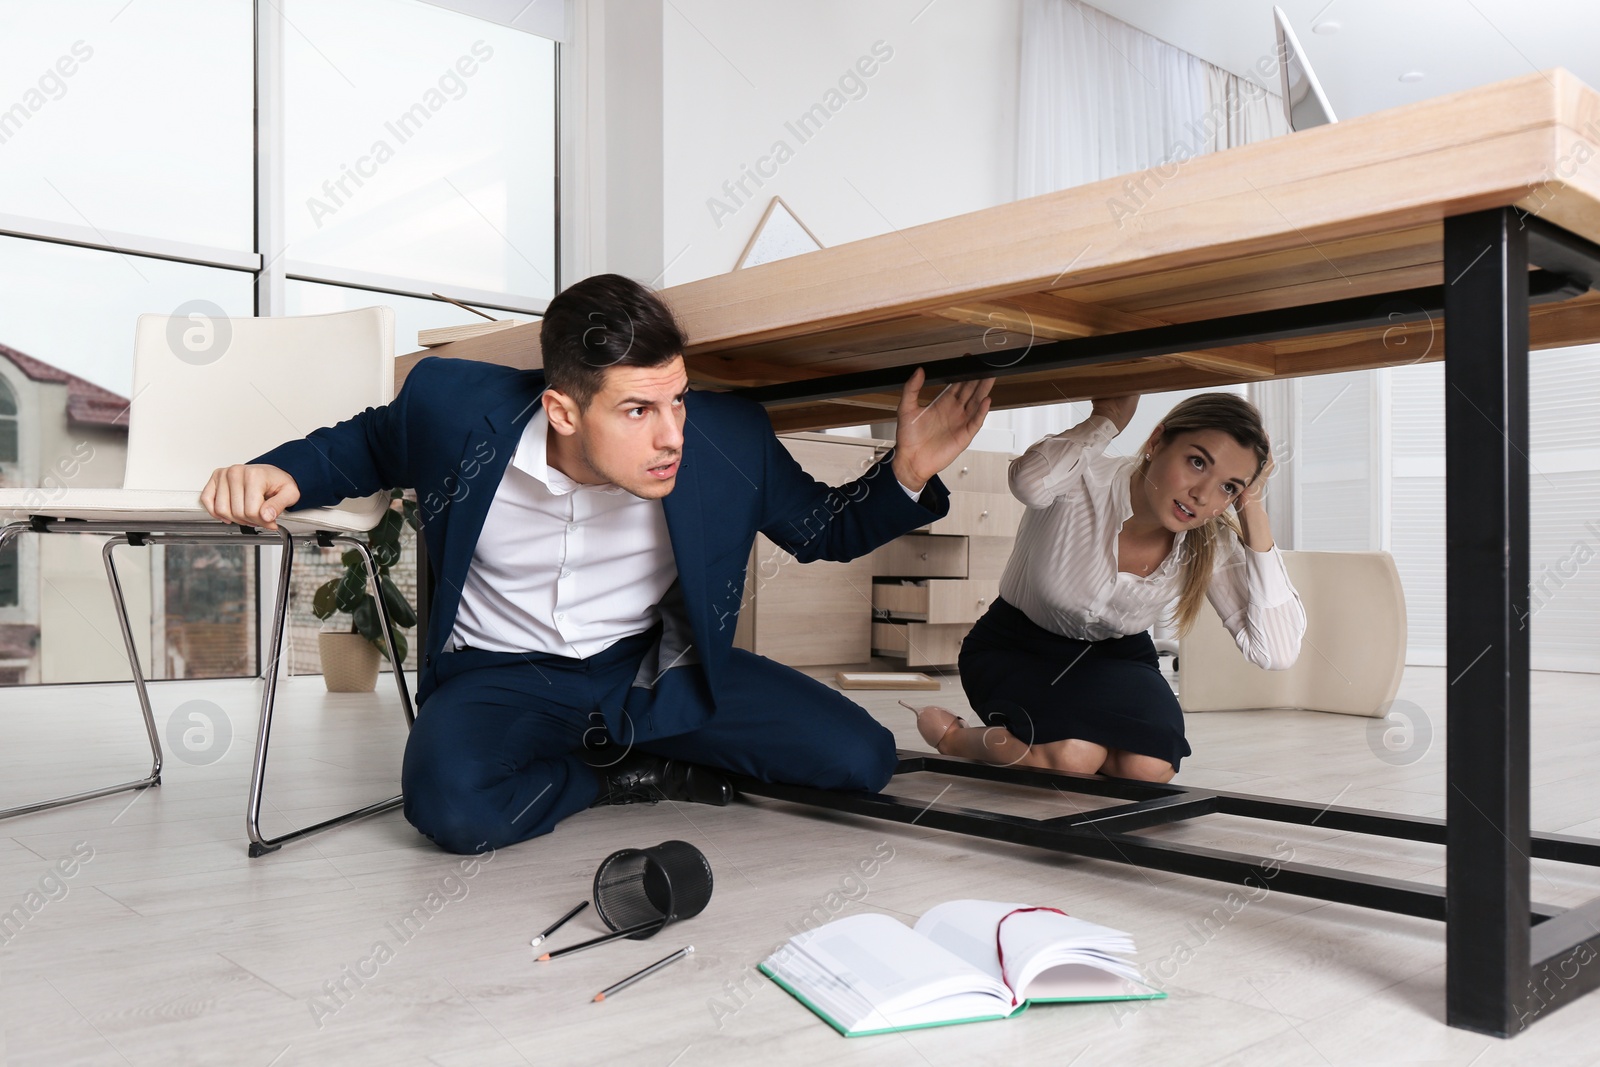 Photo of Scared employees hiding under office desk during earthquake